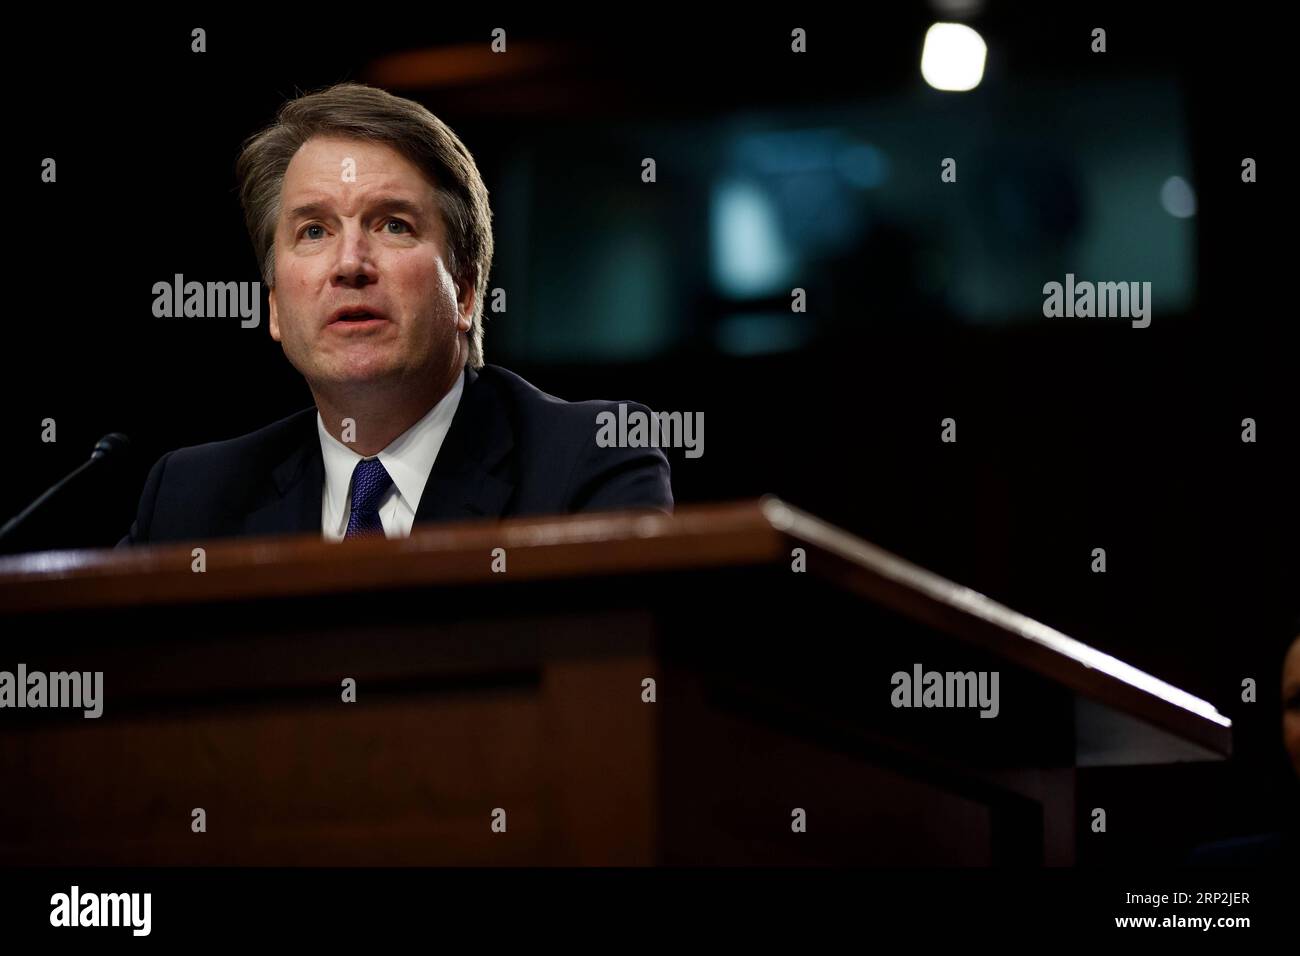 (180905) -- WASHINGTON, Sept. 5, 2018 -- U.S. Supreme Court nominee Judge Brett Kavanaugh speaks during his Senate confirmation hearing on Capitol Hill in Washington D.C., the United States, Sept. 4, 2018. The Senate confirmation hearing for Kavanaugh began Tuesday, which has descended into chaos as Democrats protested about Republicans blocking access to documents concerning the judge. ) (jmmn) U.S.-WASHINGTON D.C.-BRETT KAVANAUGH-HEARING TingxShen PUBLICATIONxNOTxINxCHN Stock Photo